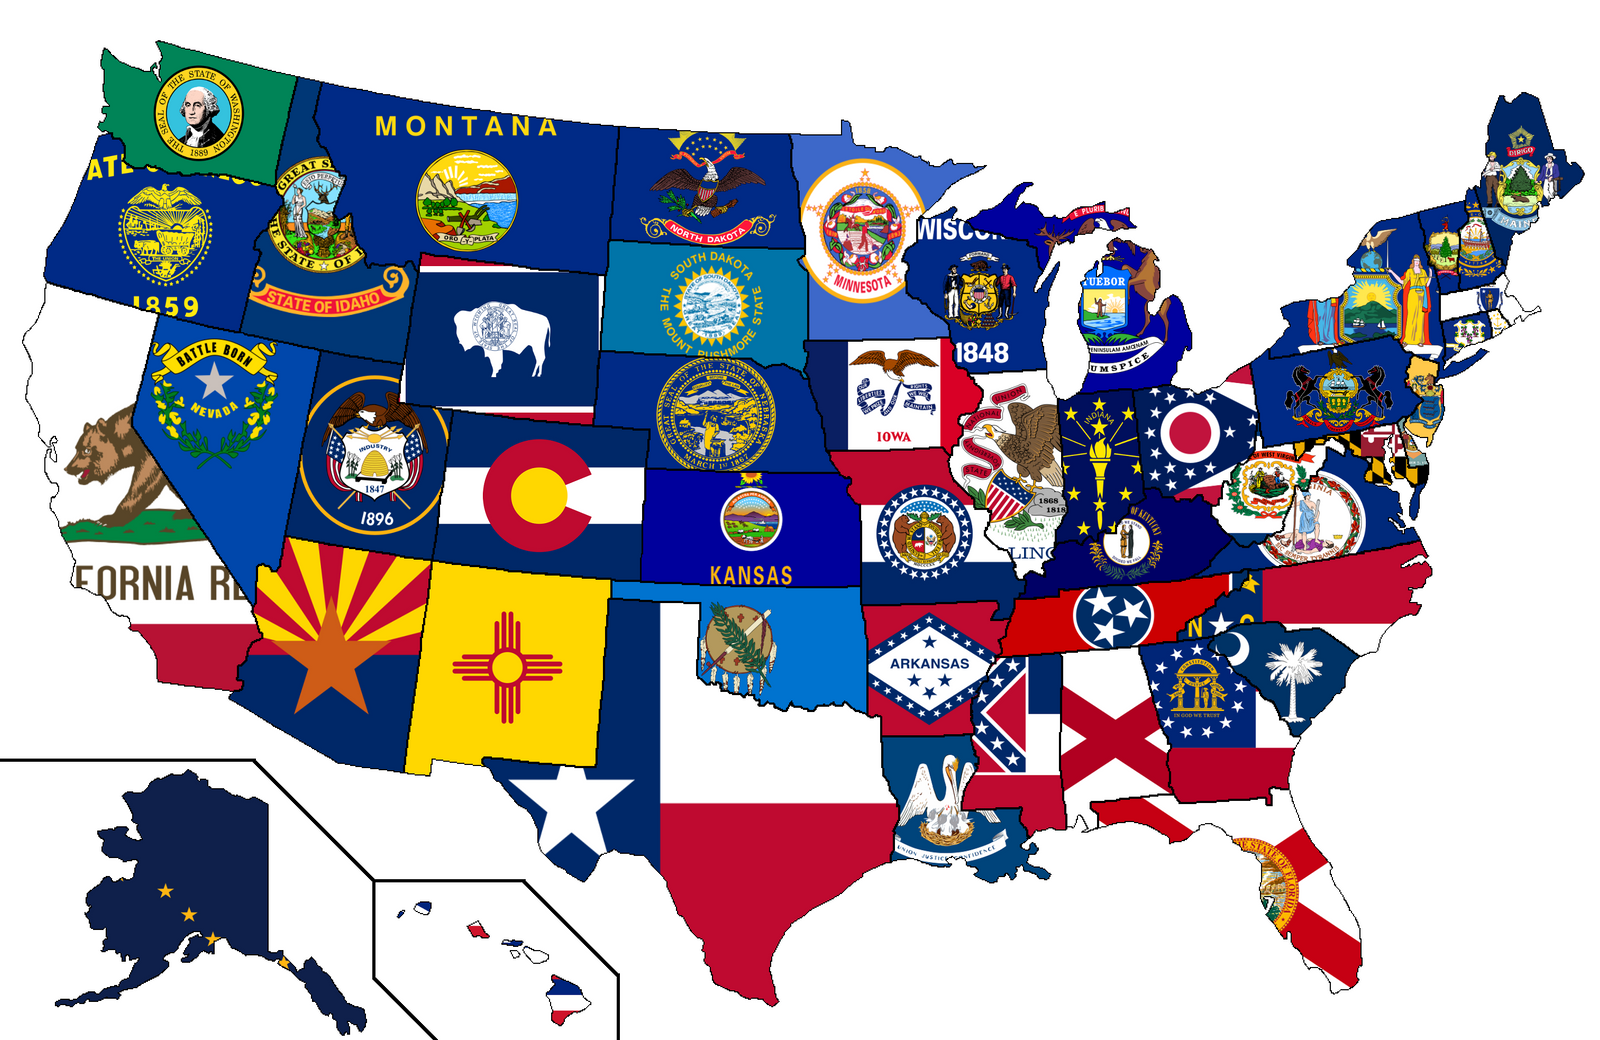 Colours of the US state's flags blended into one colour [1513x983] r